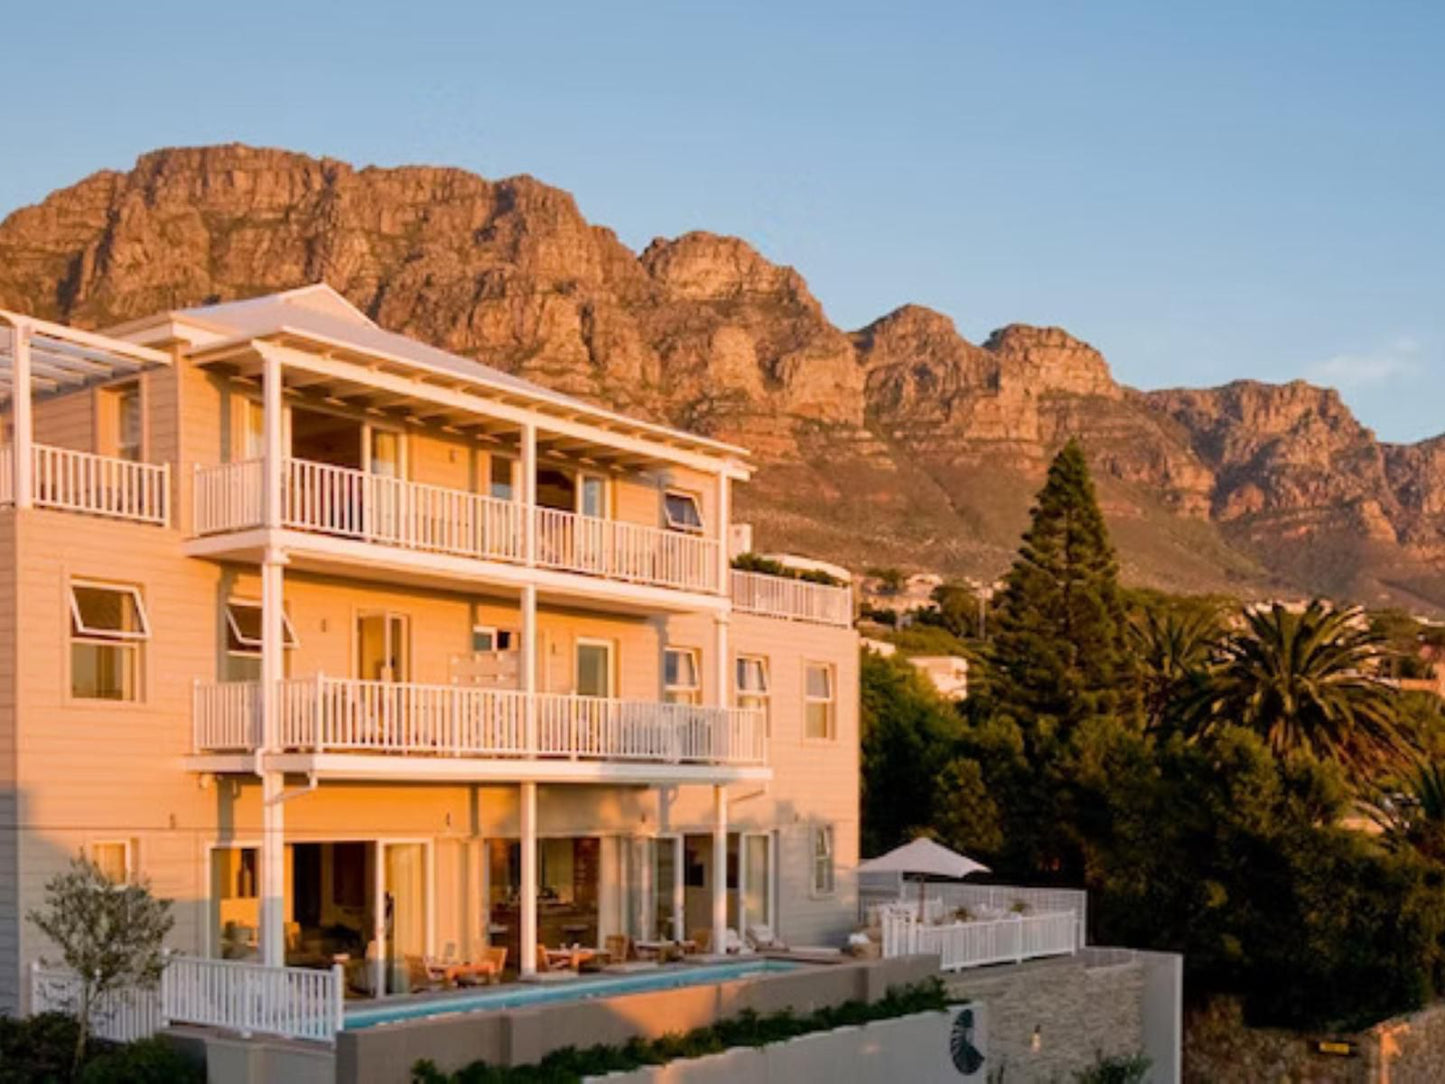 Sea Five Boutique Hotel Camps Bay Cape Town Western Cape South Africa Complementary Colors